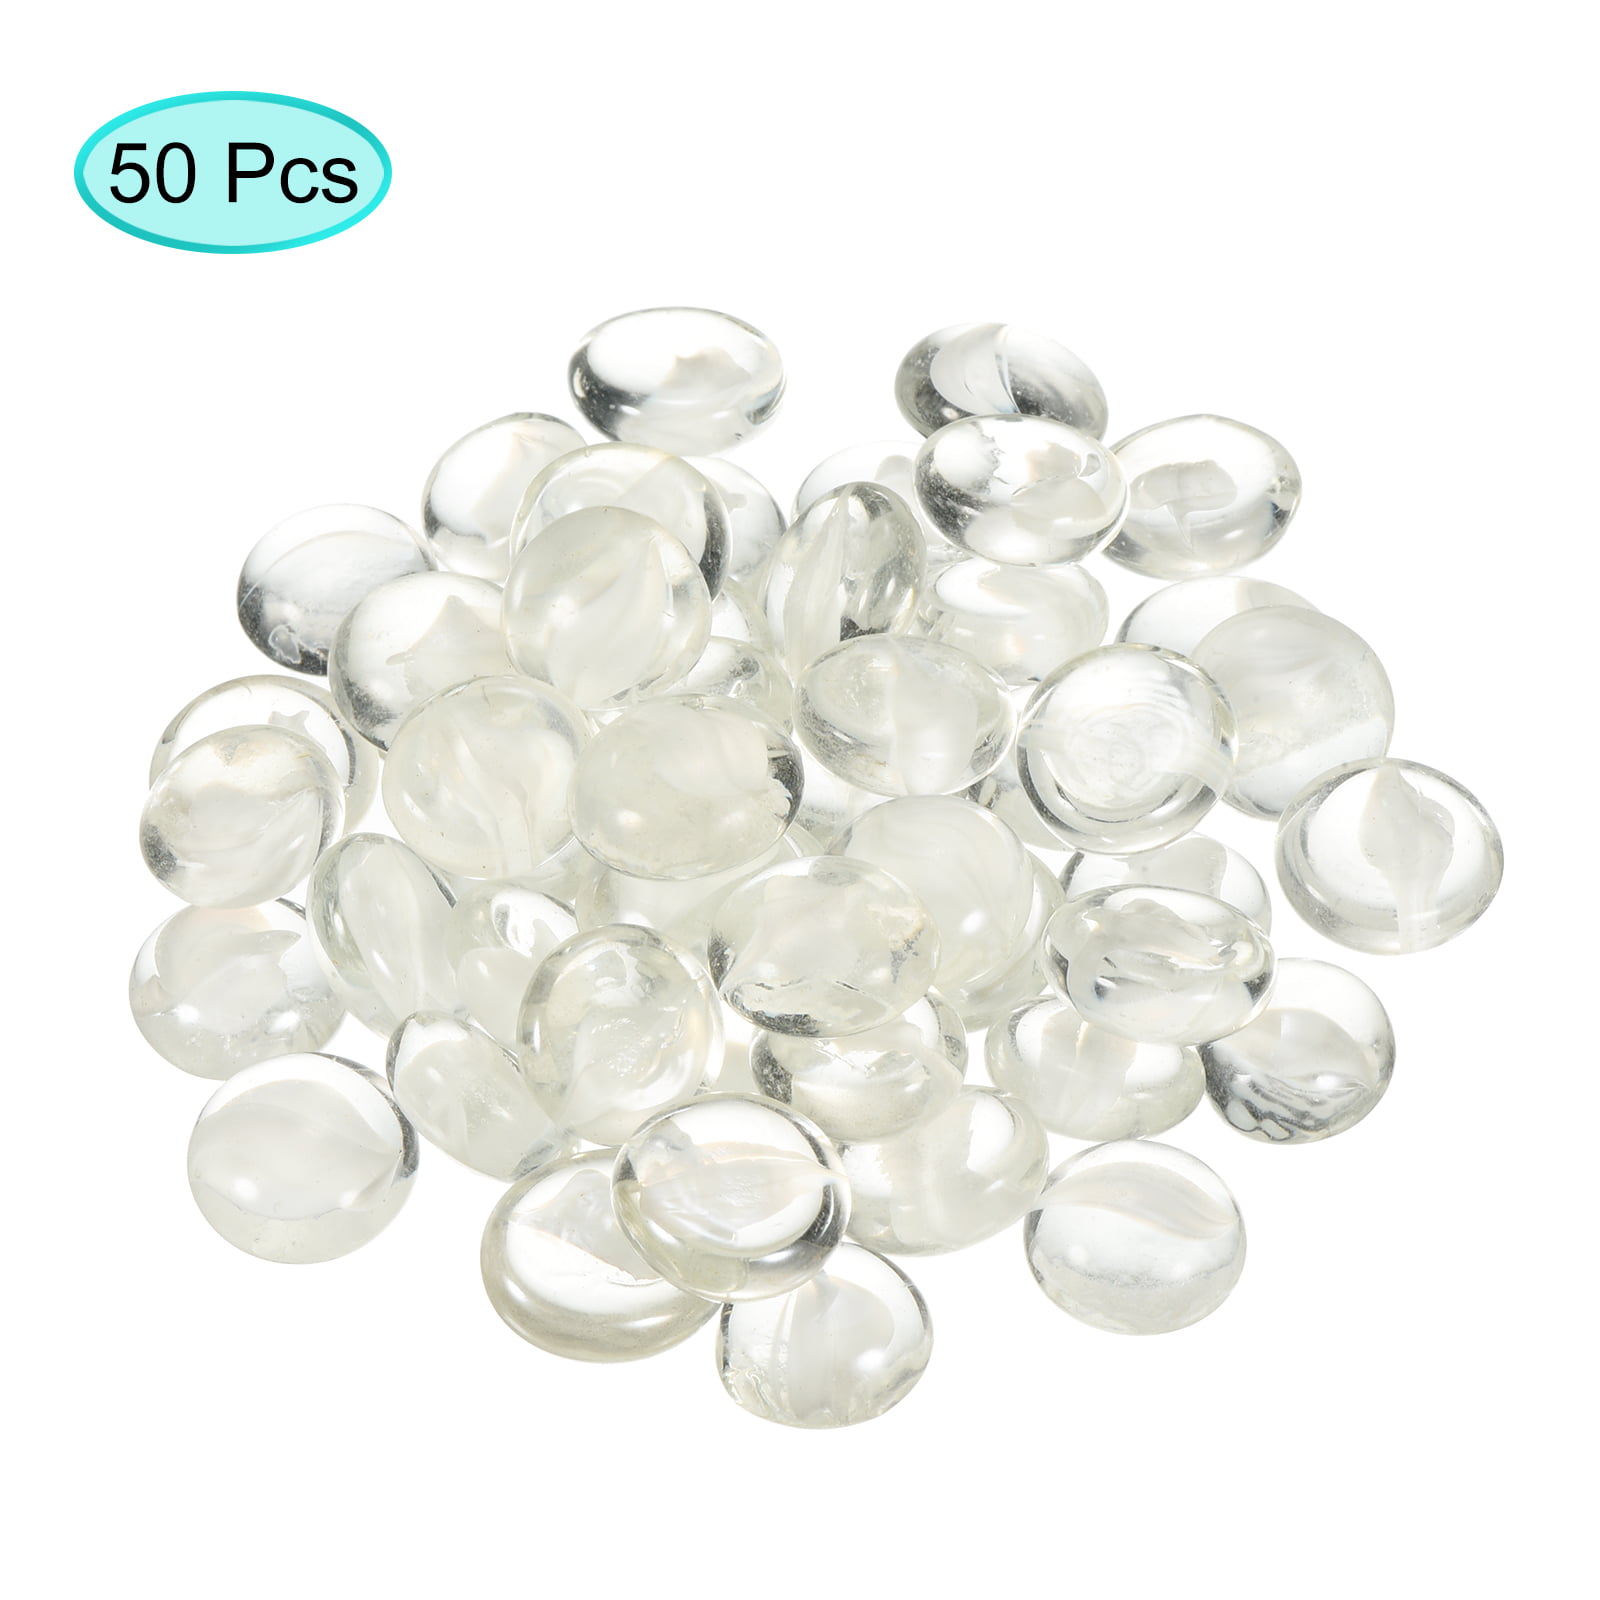 Uxcell Decorative Flat Glass Marbles 17-19mm Rock Vase Filler Gray for Fish  Tank Table Scatter Decor, 50 Pcs